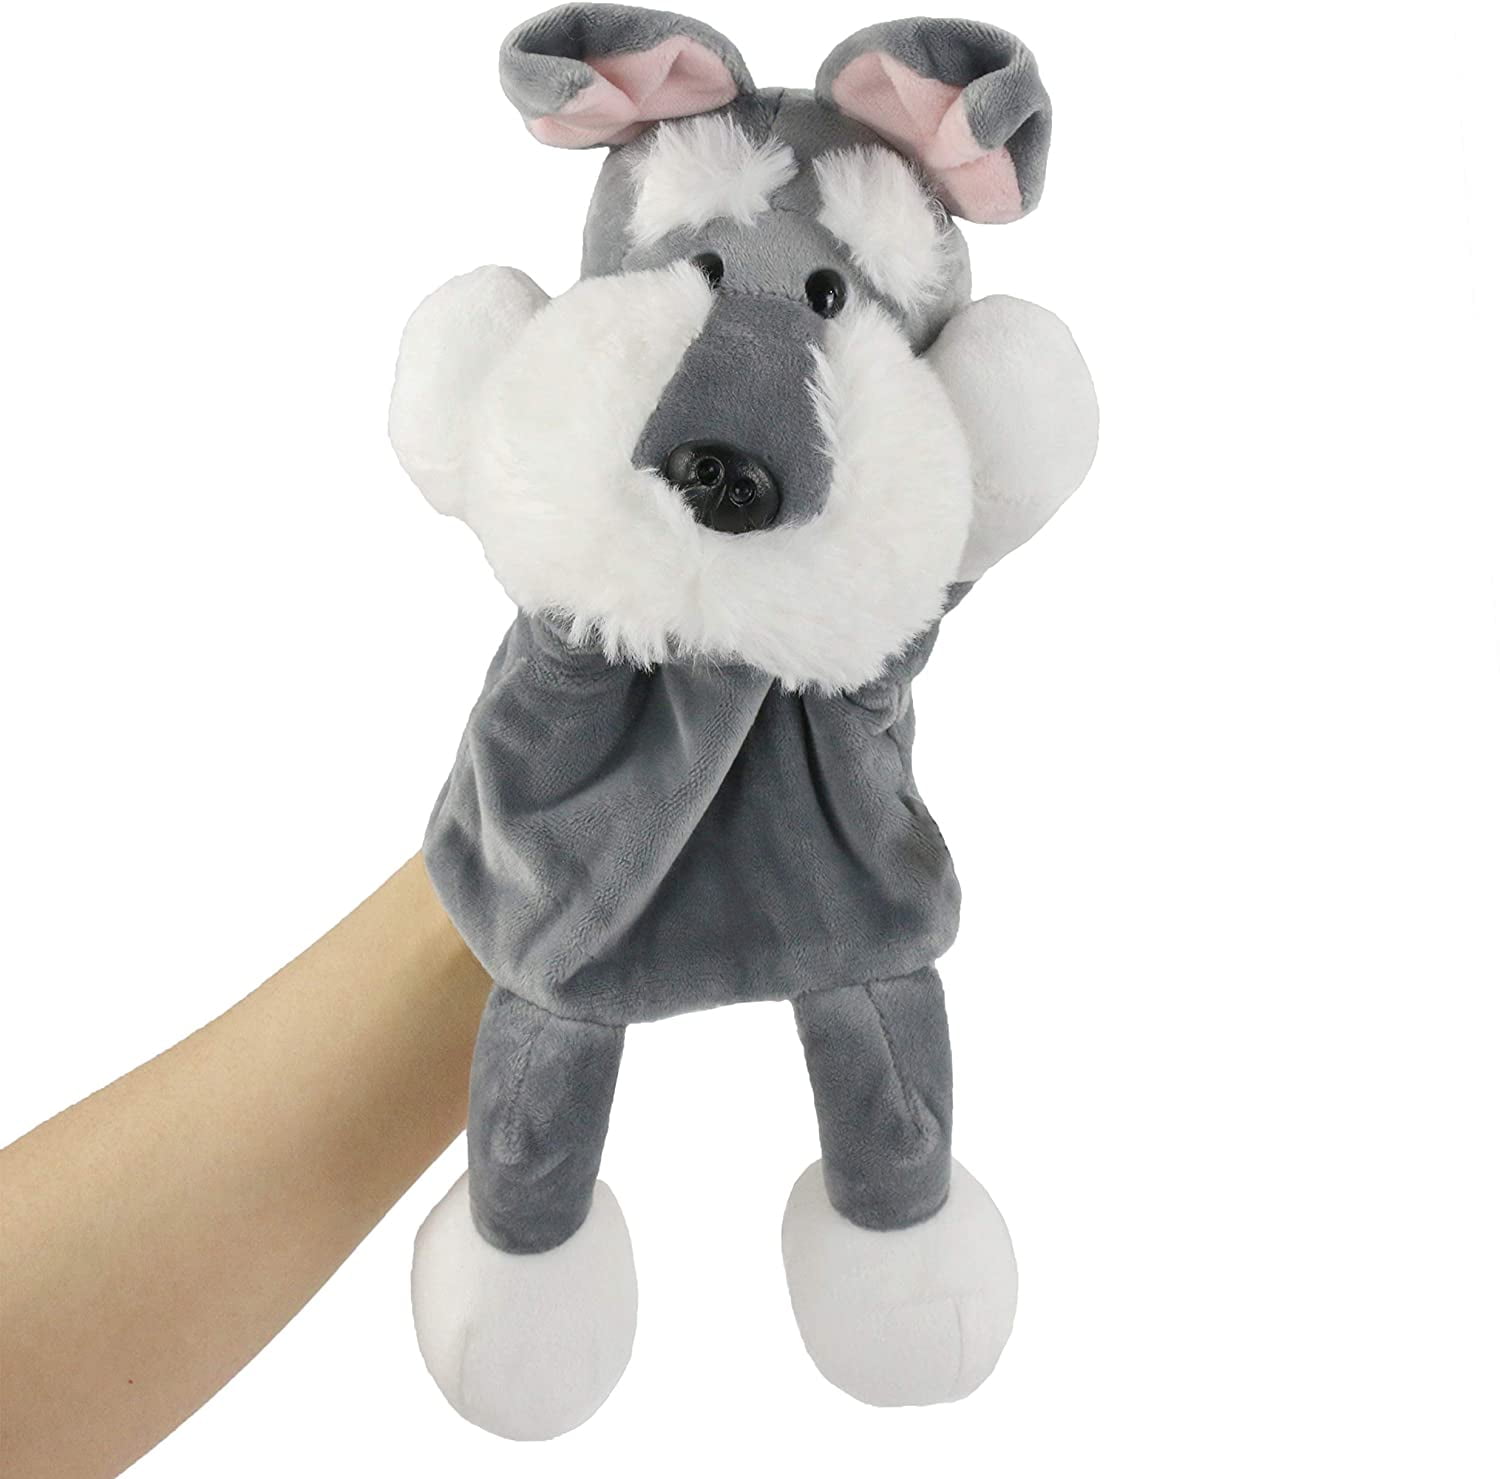 SweetGifts Plush Dog Puppy Open Mouth Hand Puppets Animal Toys for Imaginative Pretend Play Stocking Storytelling 